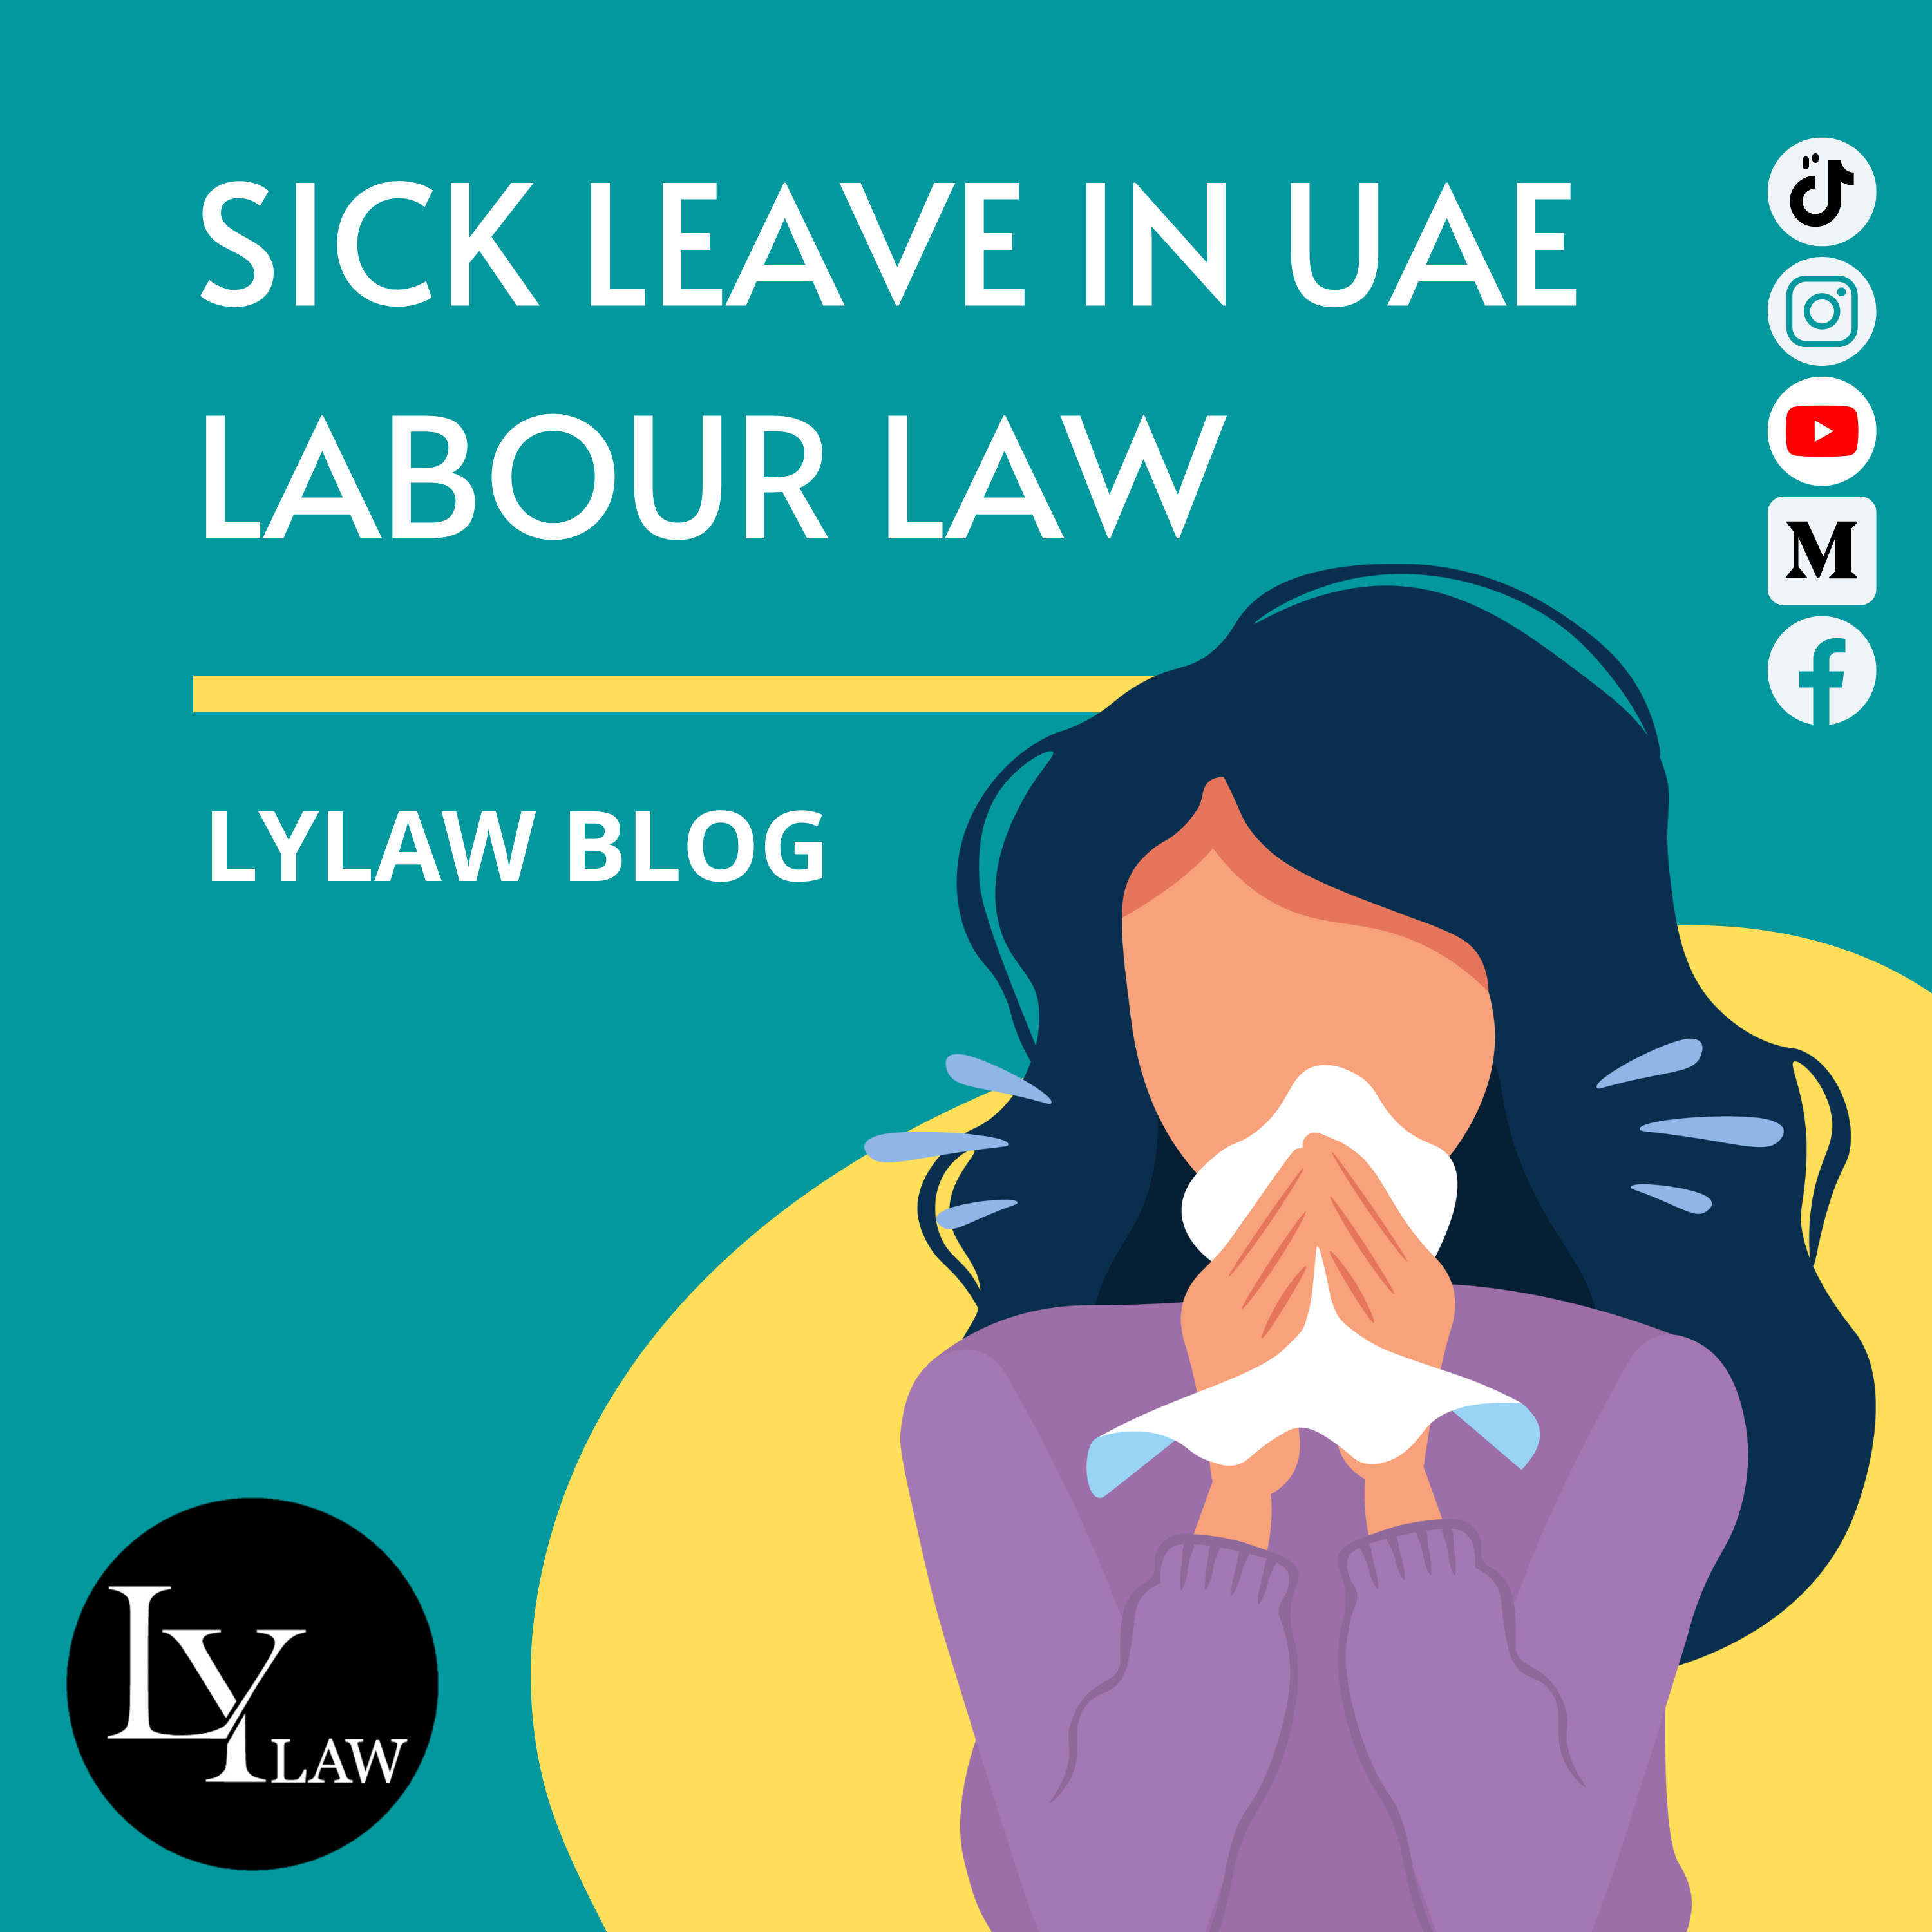 SICK LEAVE IN UAE - LABOUR LAW